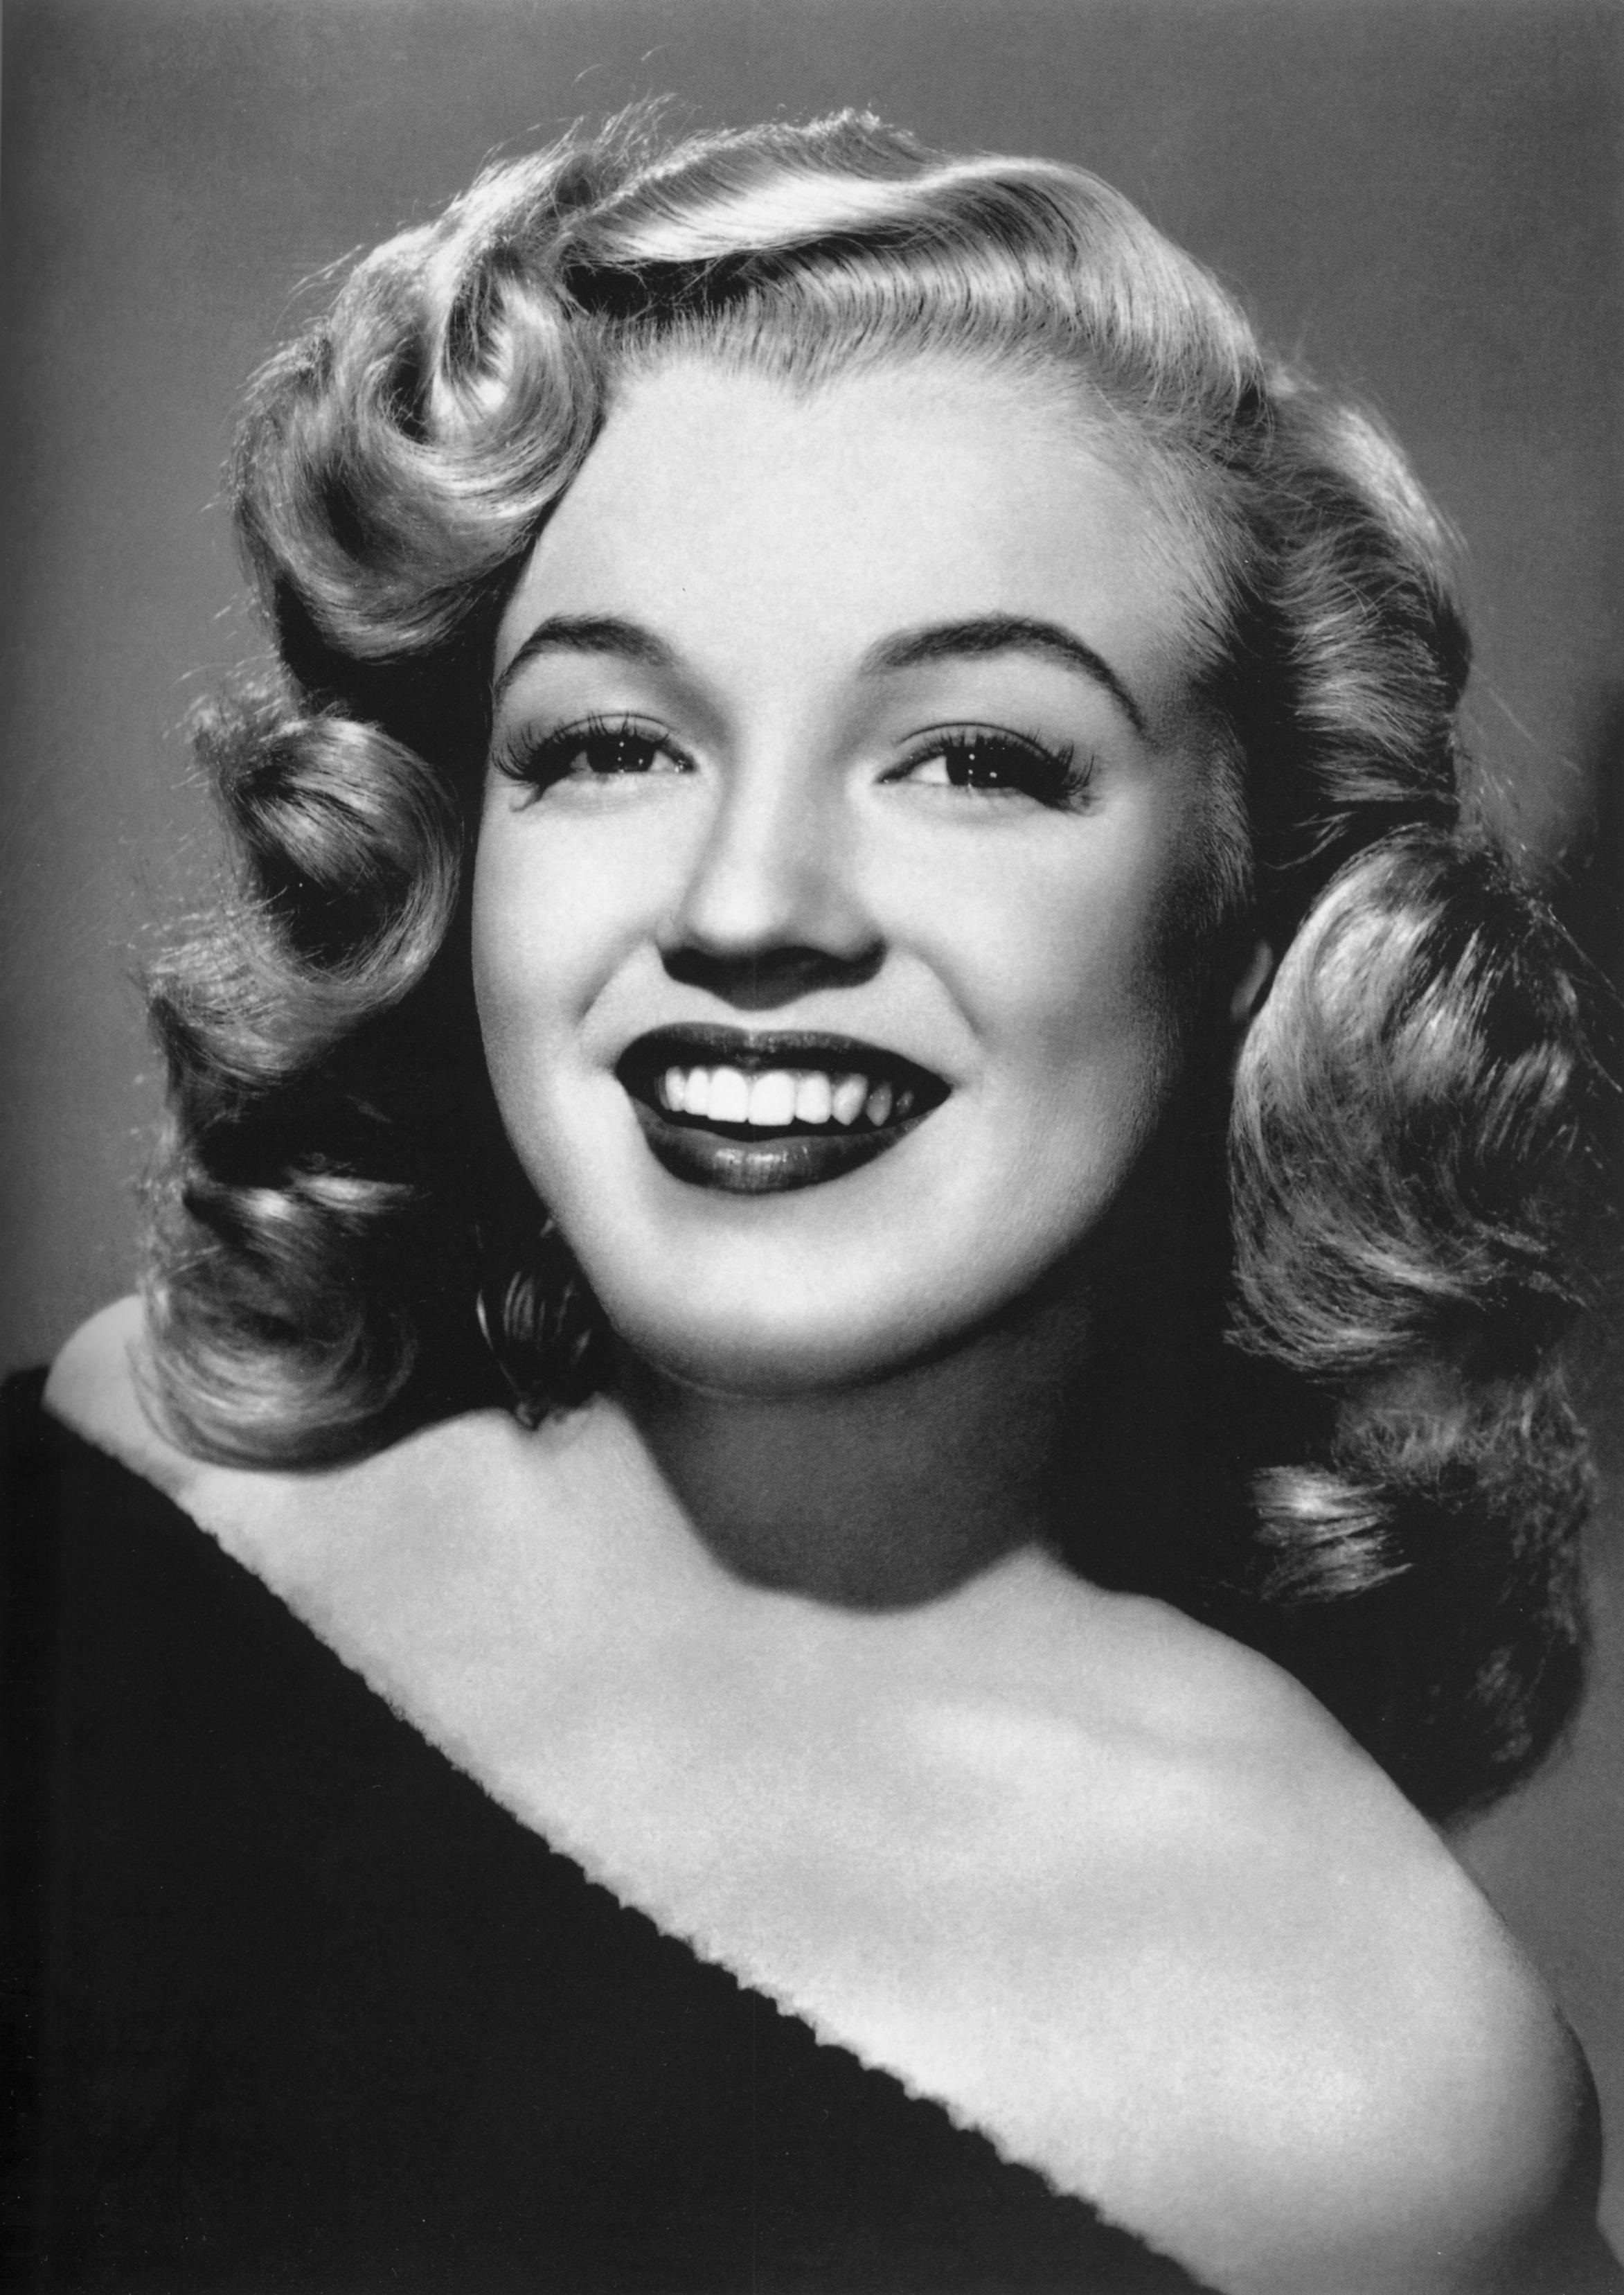 Portrait of young Marilyn Monroe 1950s